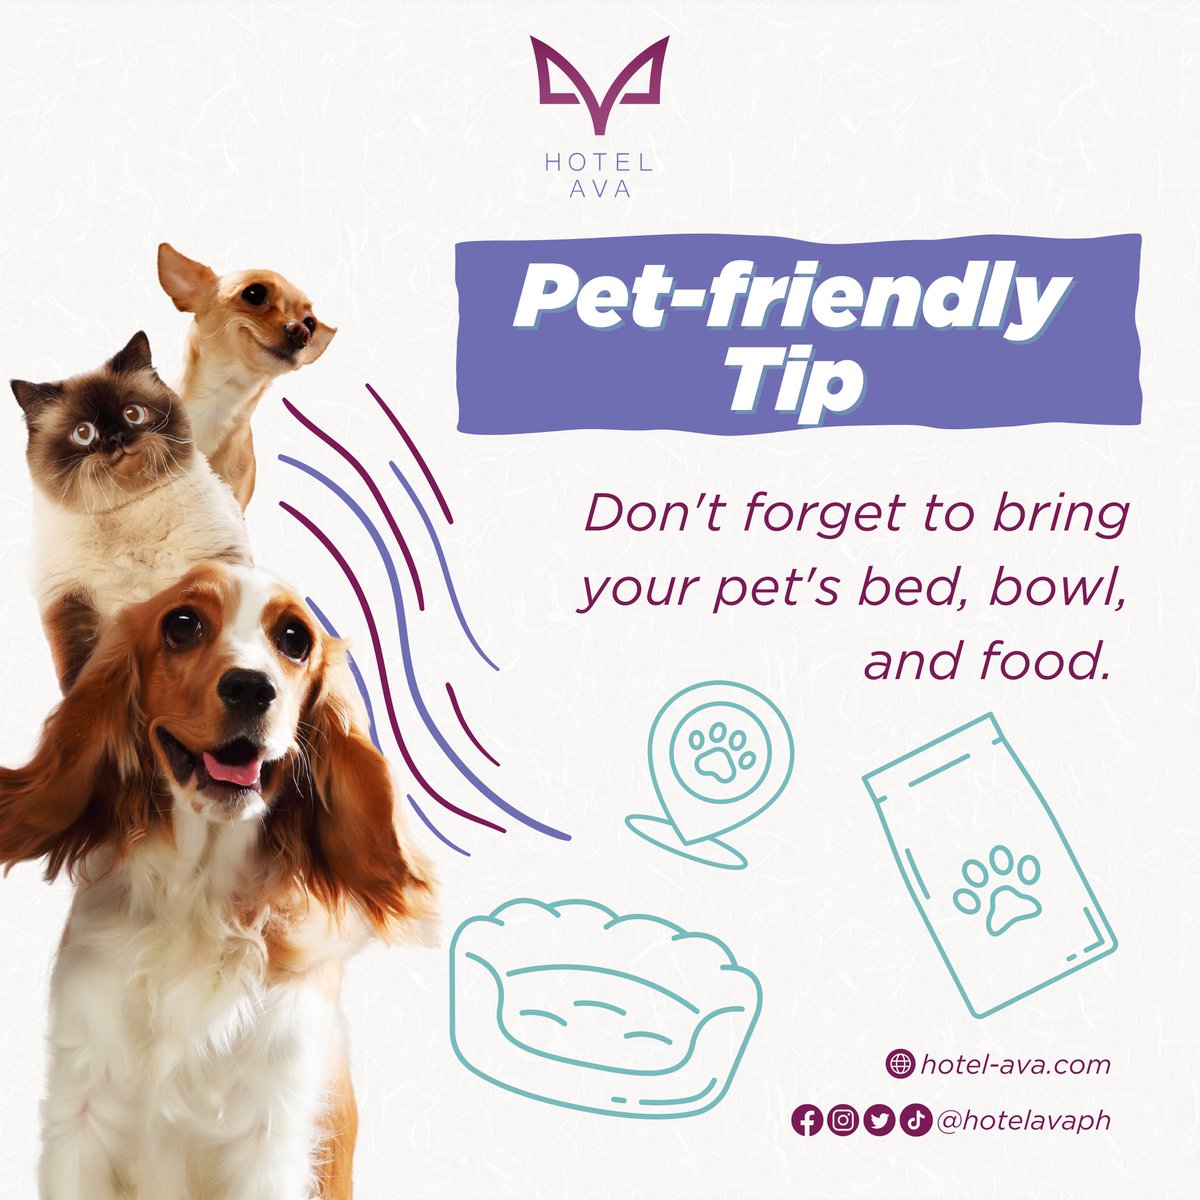 Here’s a reminder for a paw-some staycation! 😊🐾 

#hotelava #petfriendlyhotel